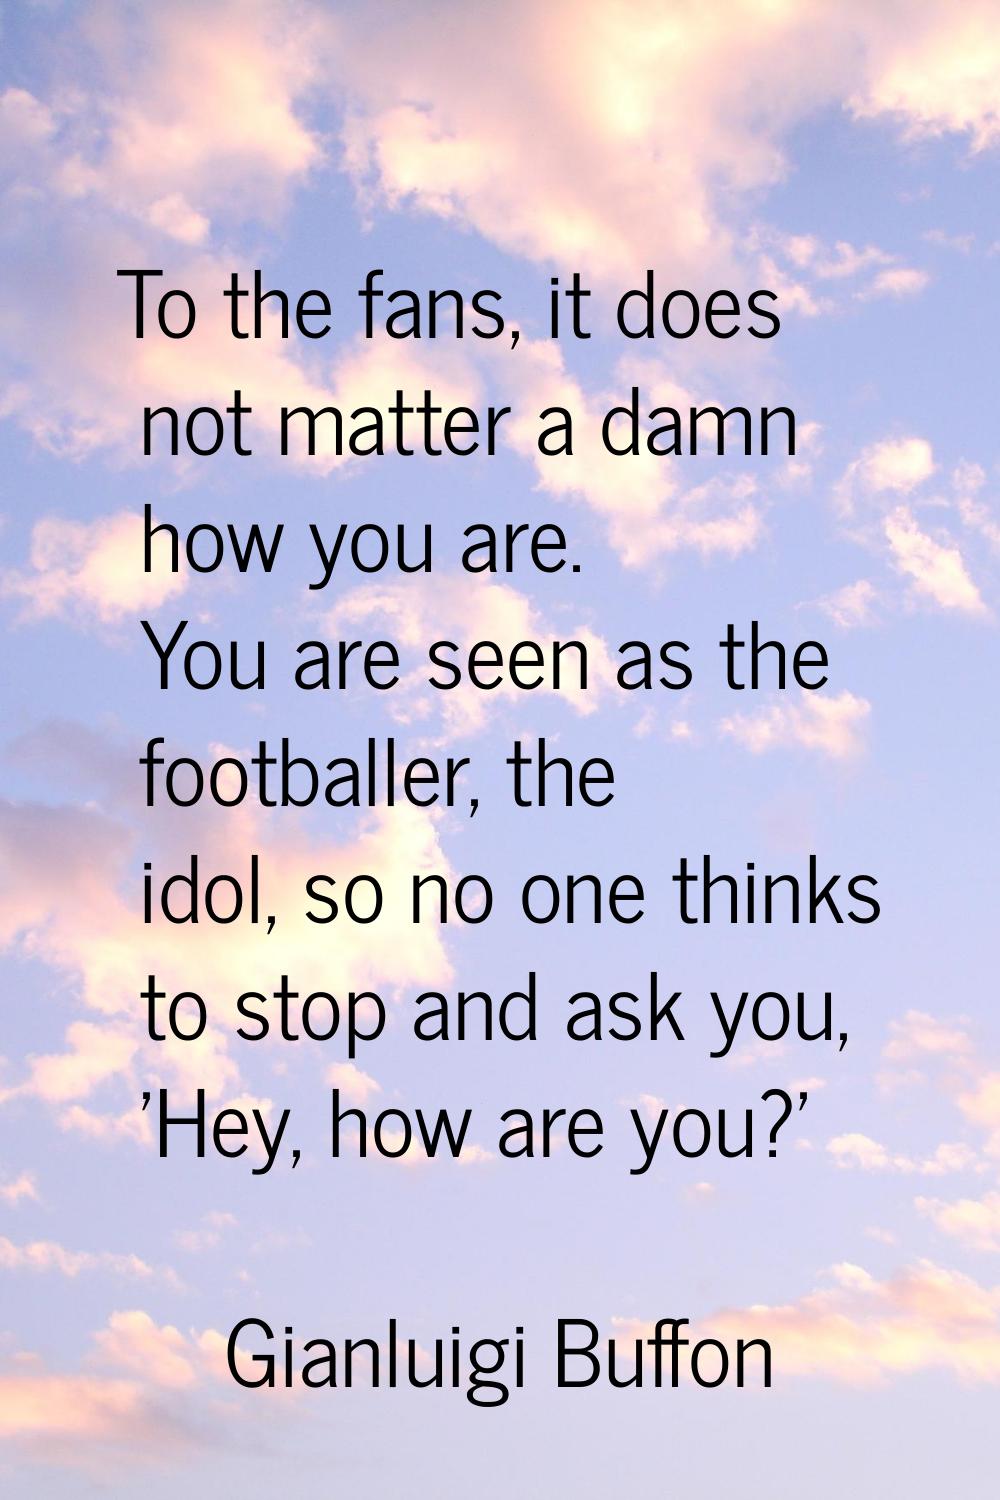 To the fans, it does not matter a damn how you are. You are seen as the footballer, the idol, so no